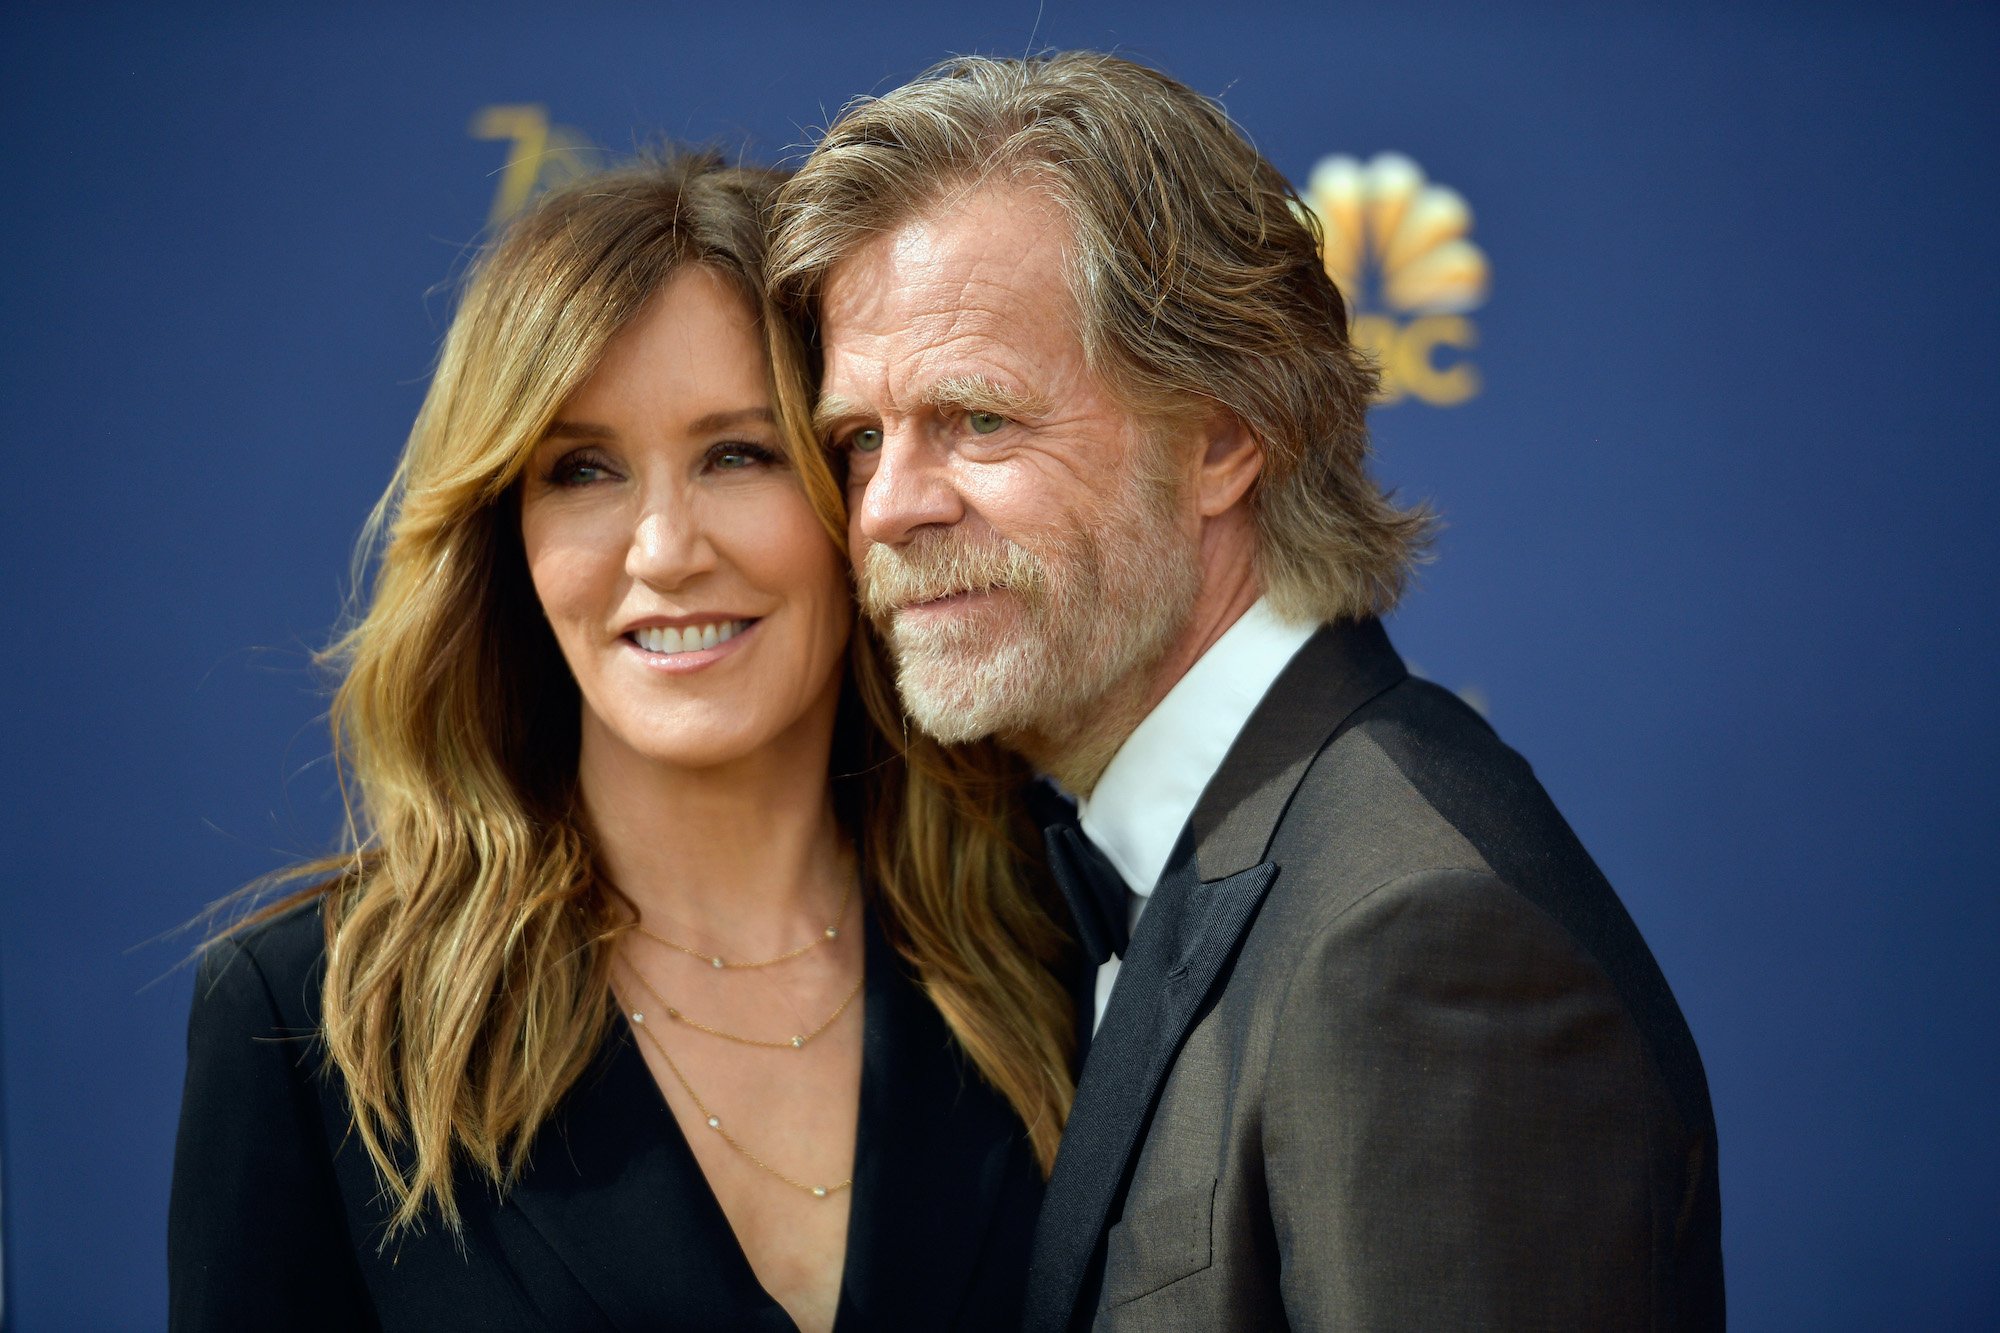 Felicity Huffman and William H. Macy, two Emmy Awards winners, pose at the 2018 Emmys red carpet